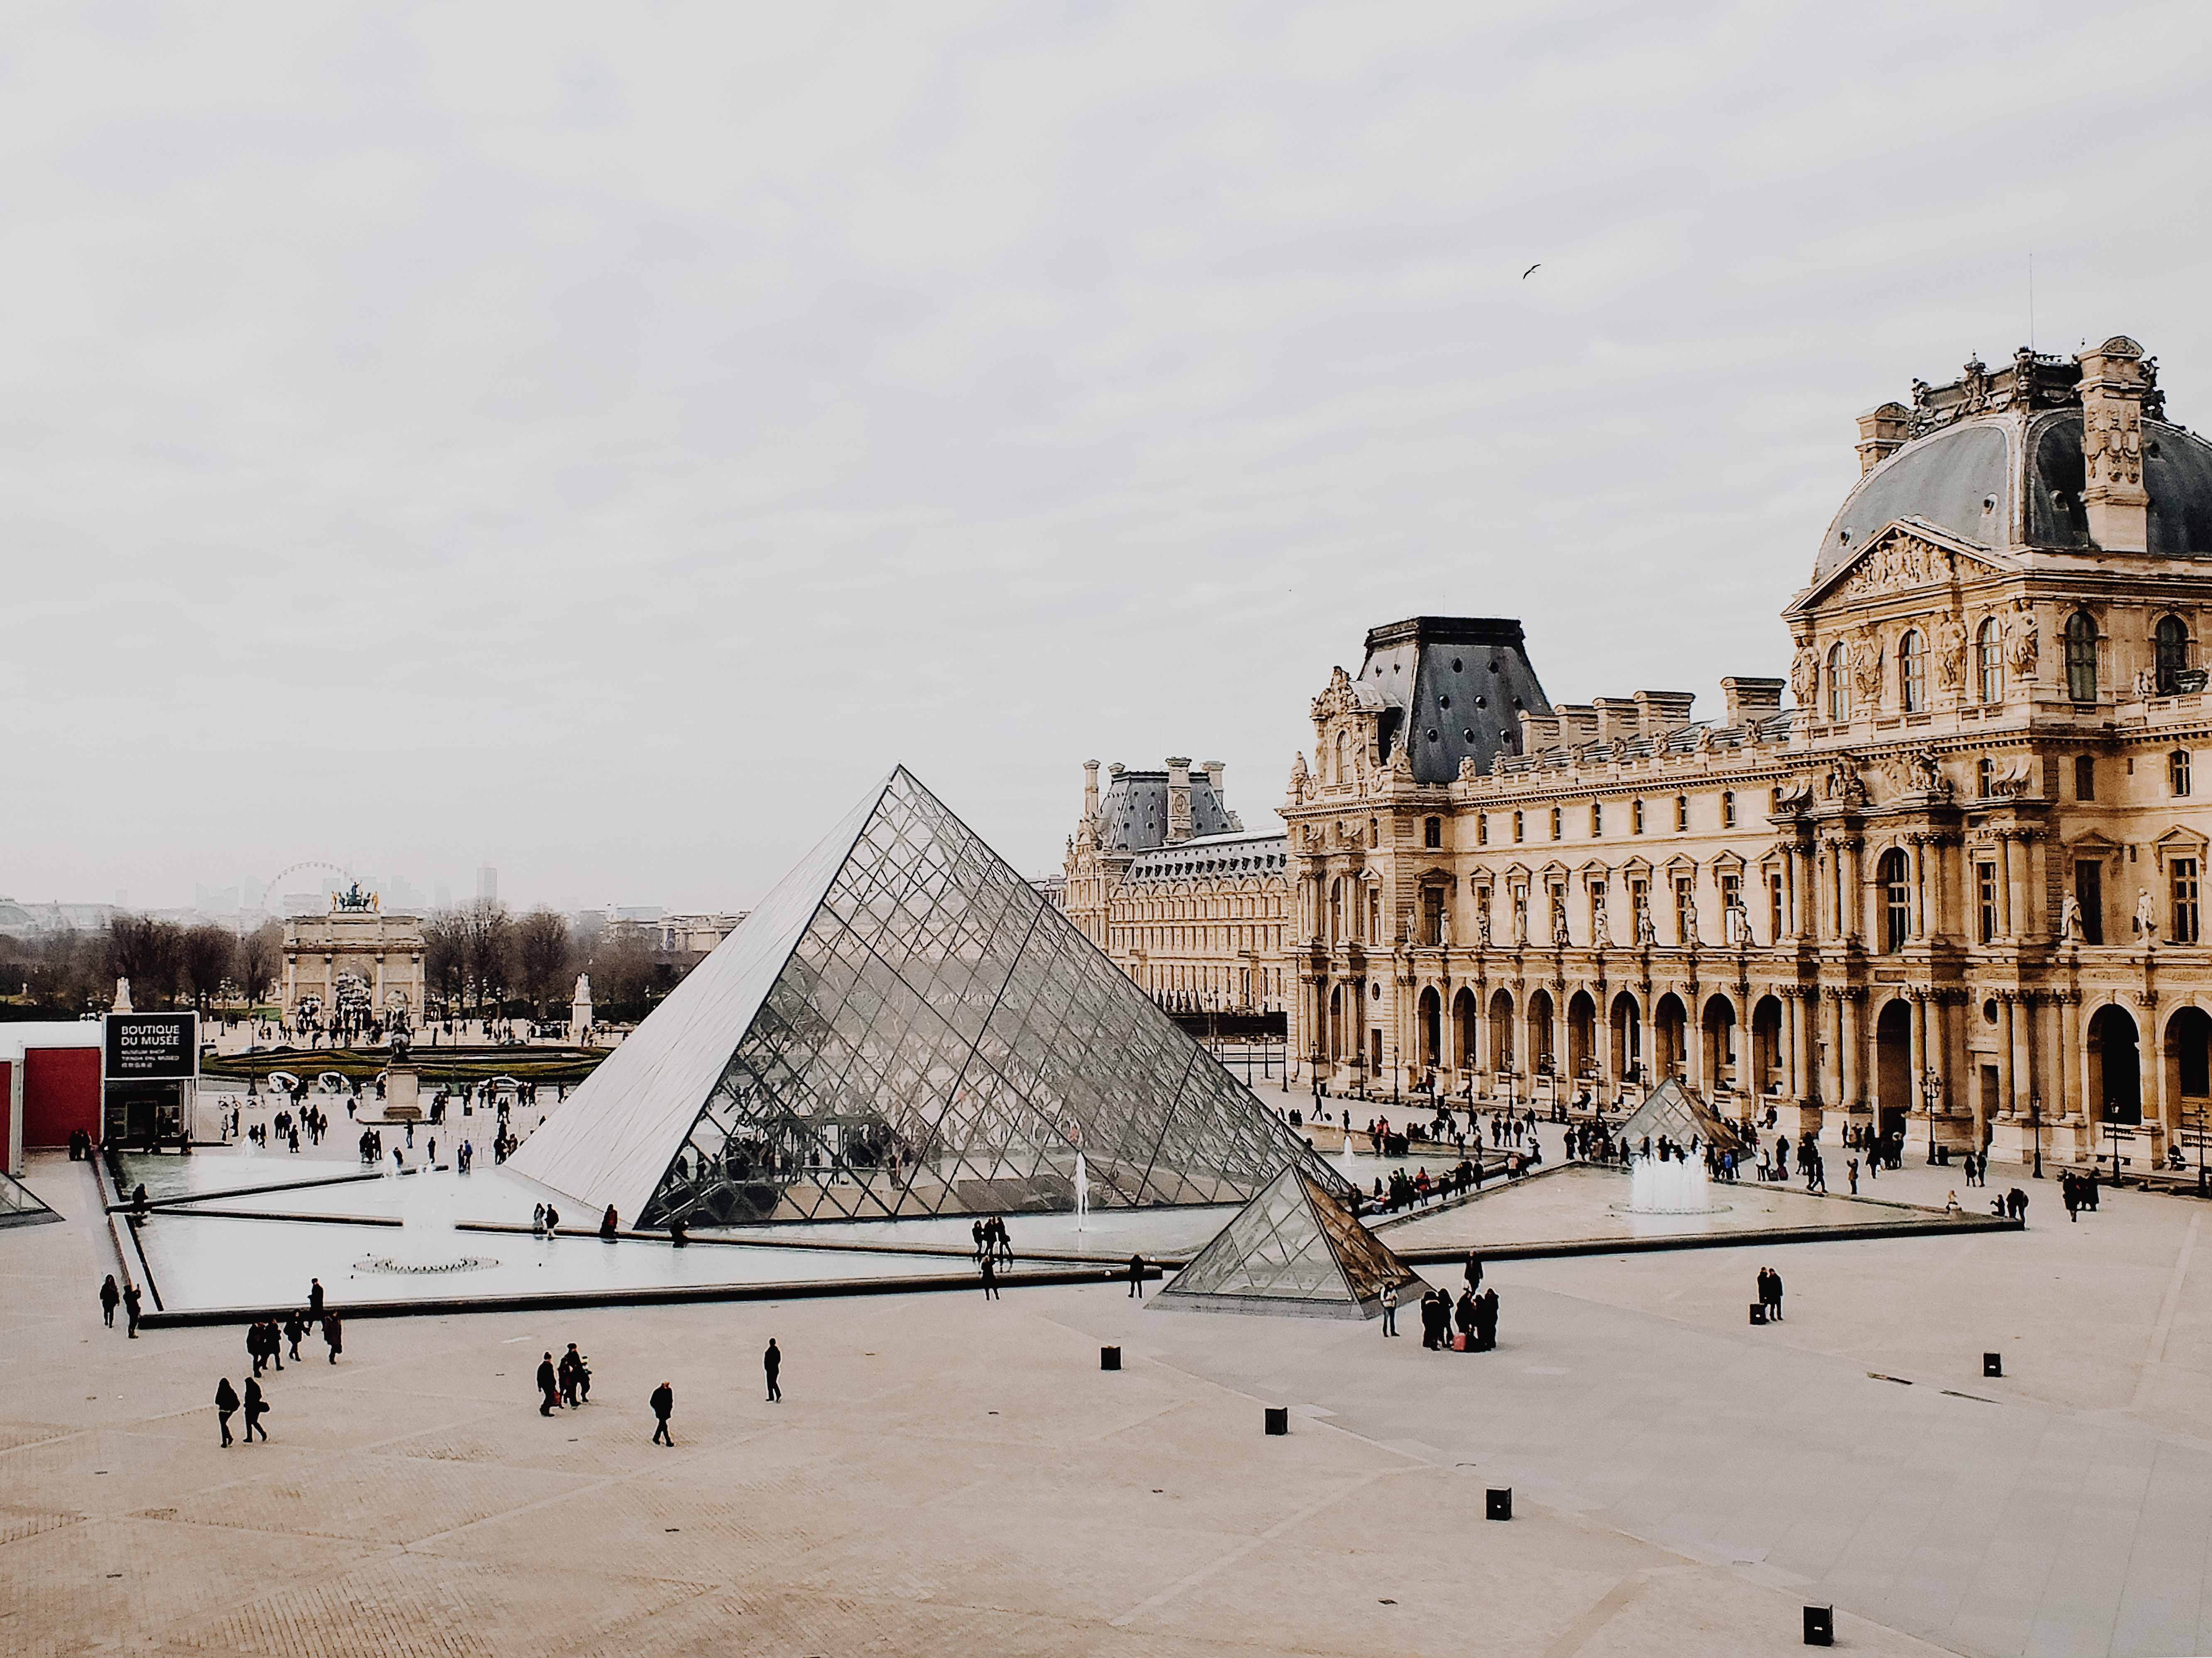 View of the Louvre Museum in Paris